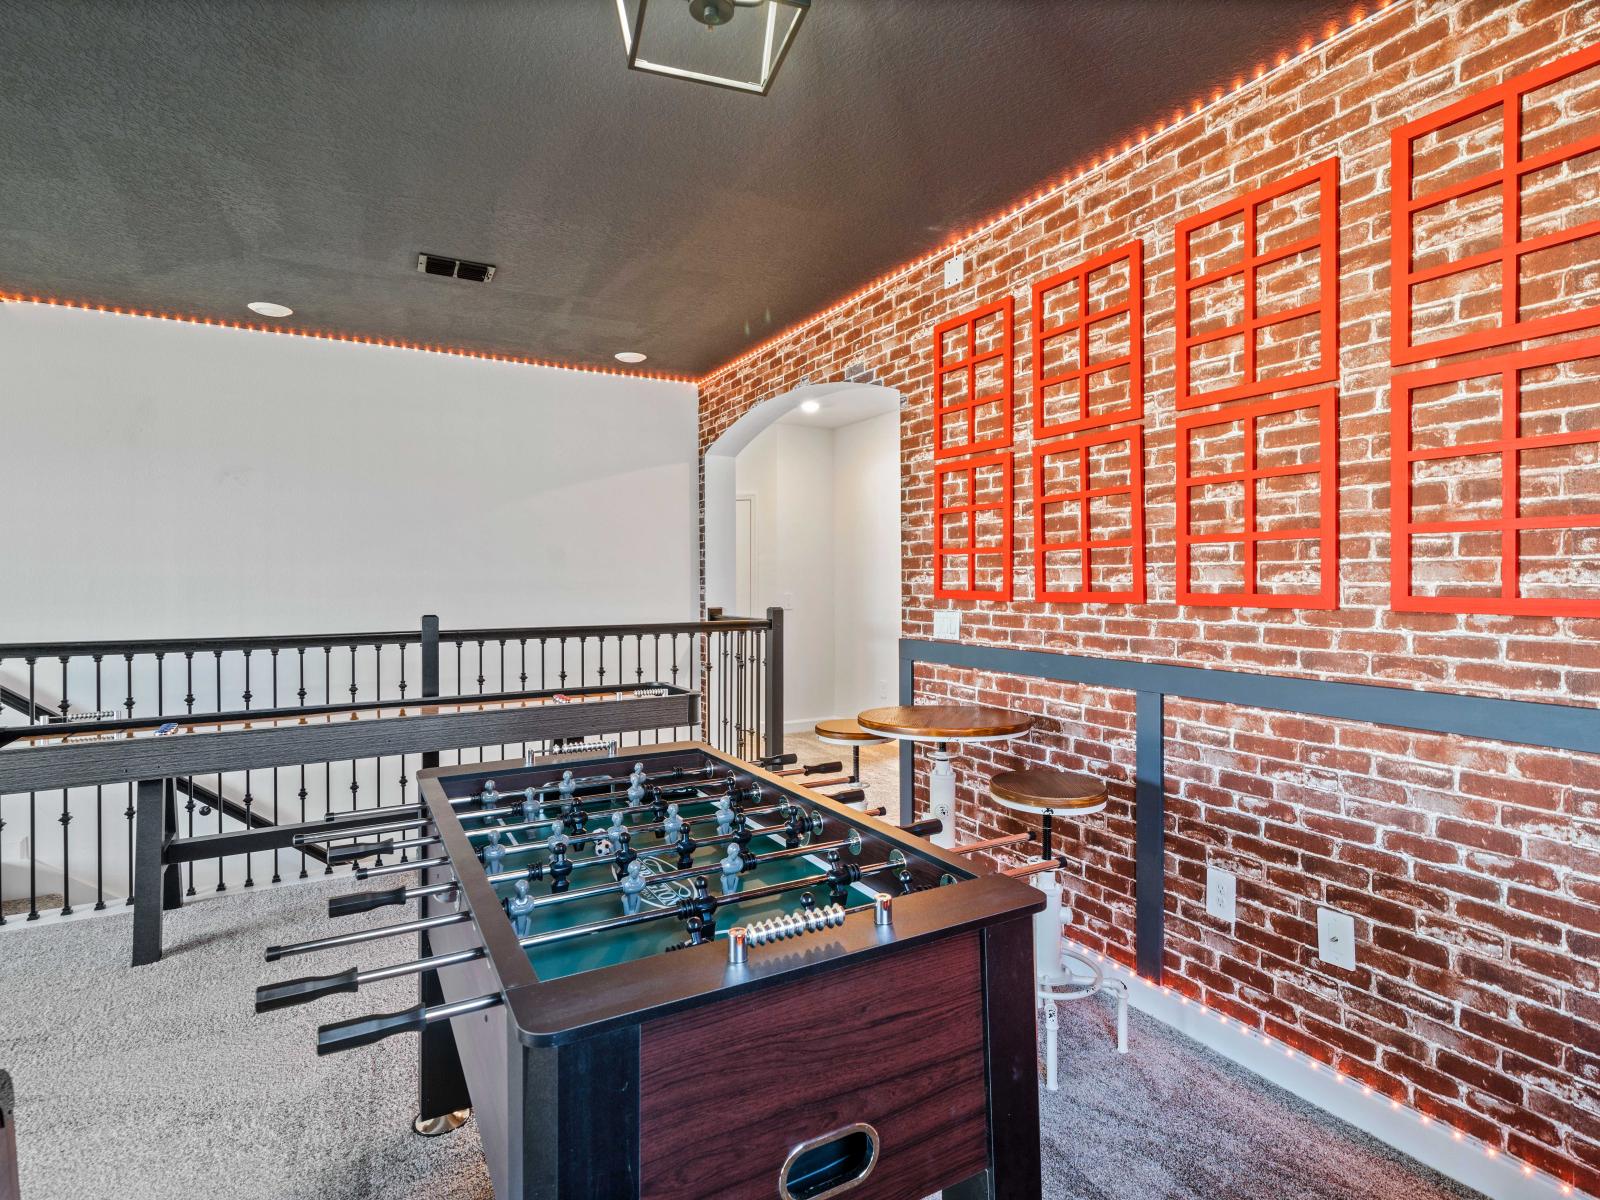 Game area with a foosball table of the Home in Davenport Florida - Perfect for improving your game or enjoying a friendly match - A hub of entertainment for all ages